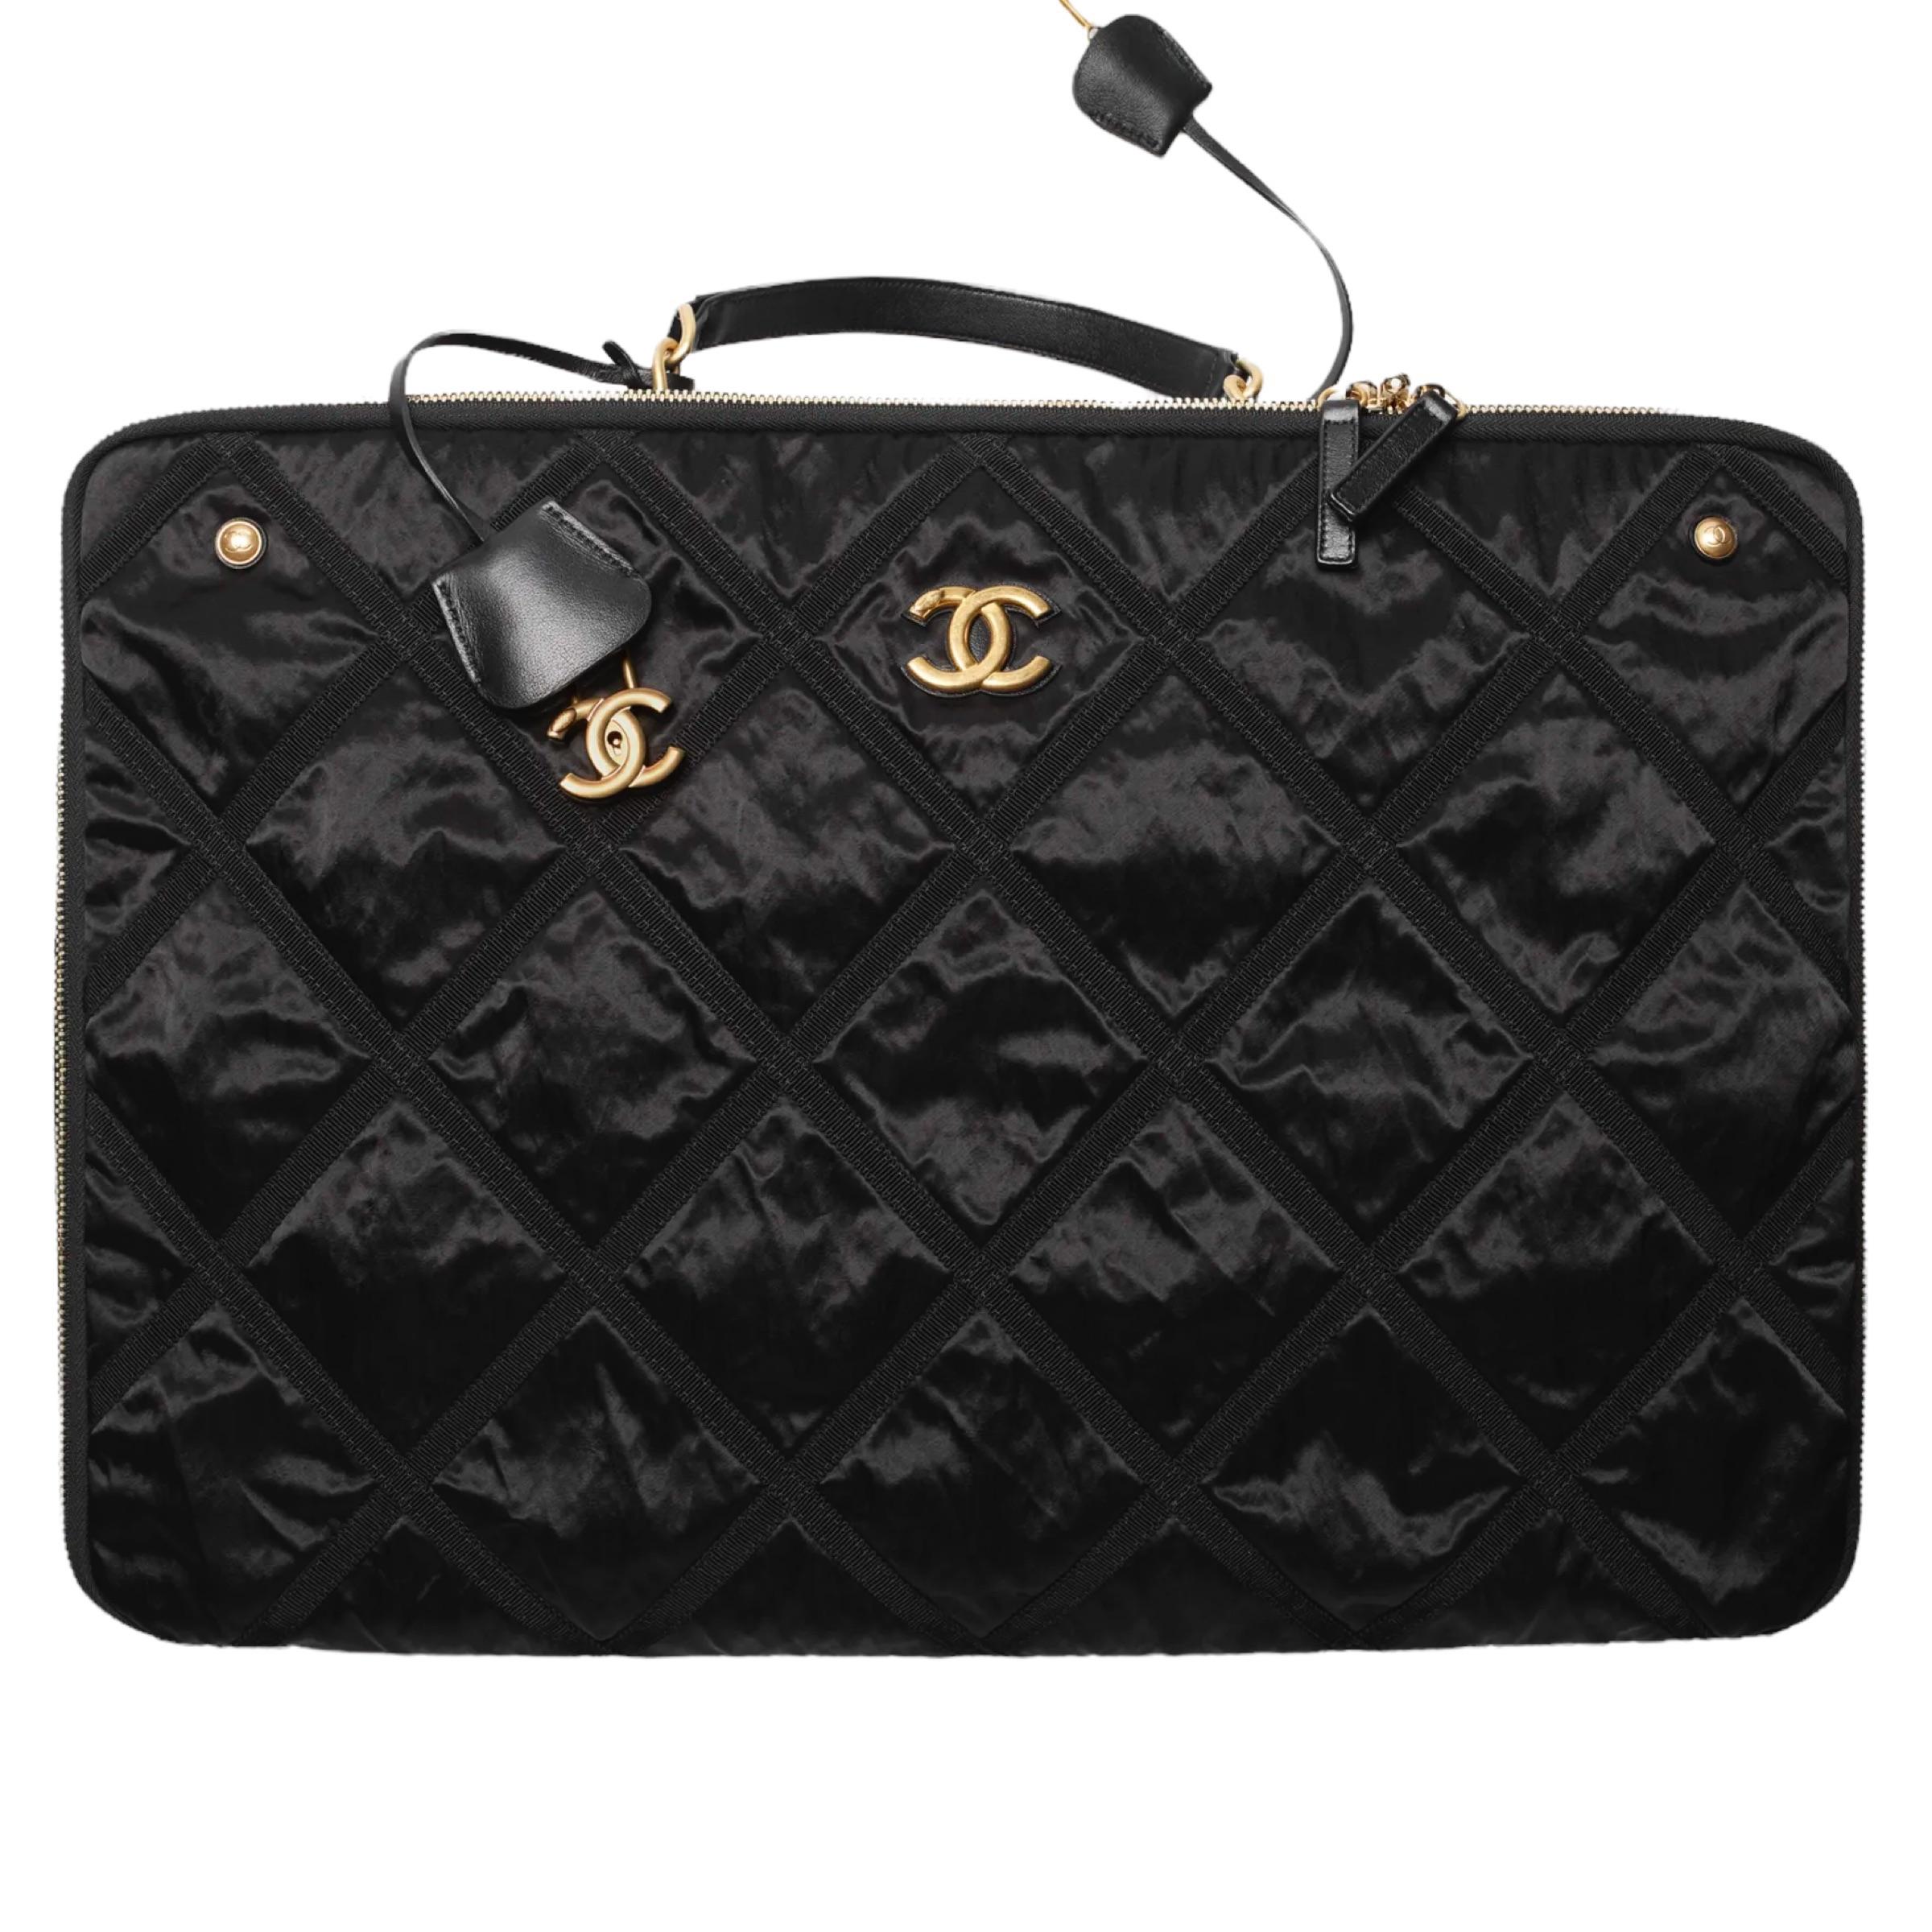 New Chanel Black Nylon Large Travel Bag Gold-Tone Hardware Tote Duffle Bag 2022

Authenticity guaranteed

DETAILS
Brand: Chanel
Condition: Brand New
Gender: Unisex
Style: Duffle bag
Color: Black
Material: Nylon
Gold CC logo
Gold CC lock and key